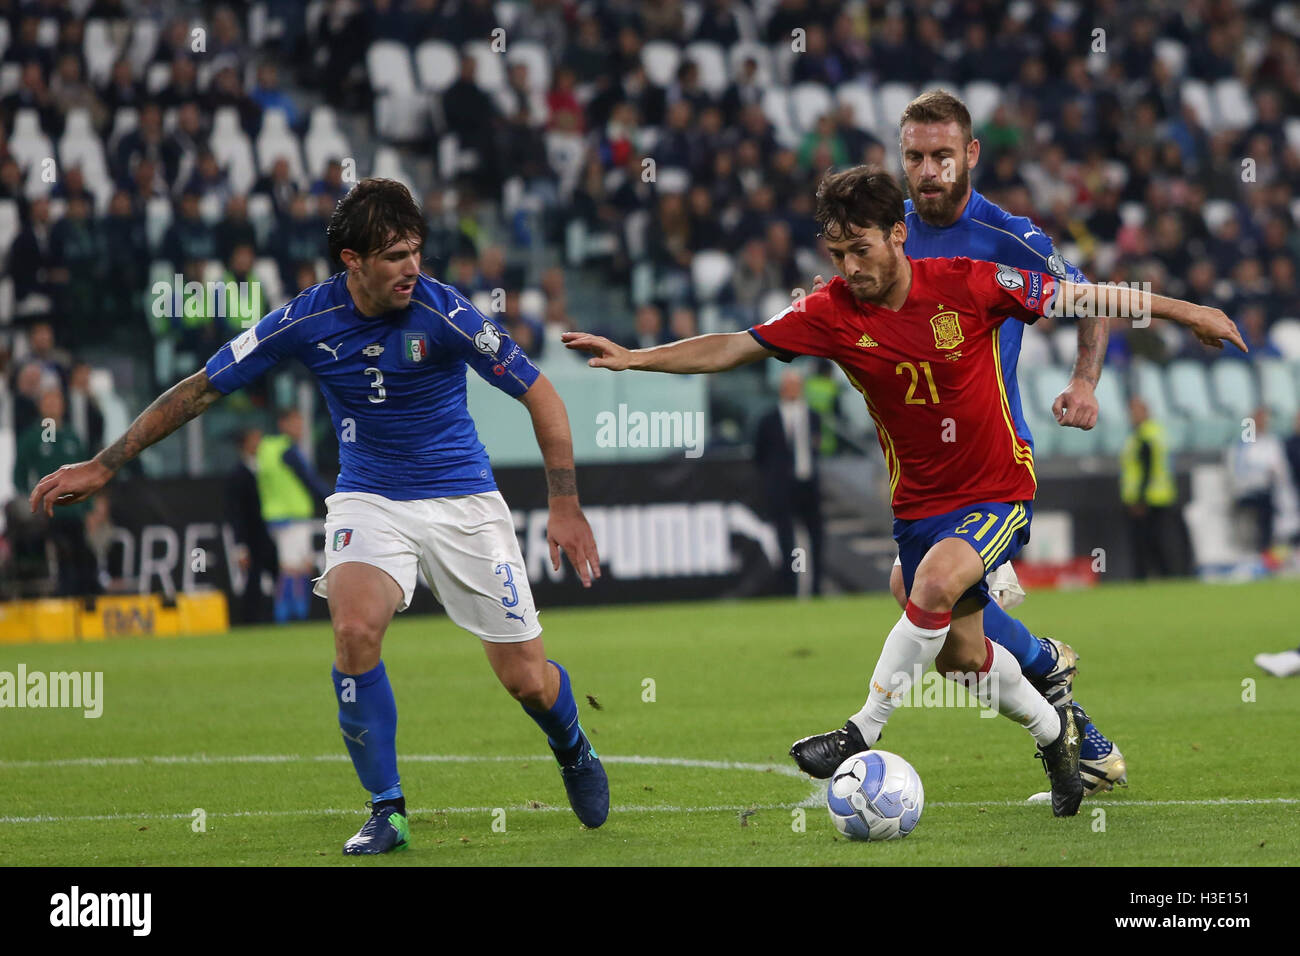 Turin, Italy. 6th October, 2016.David Silva  in action during the match European Qualifiers Russian World Cup 2018  between Italy vs Spain in Juventus  stadium in Turin on October 2016. © marco iacobucci/Alamy Live News Credit:  marco iacobucci/Alamy Live News Stock Photo